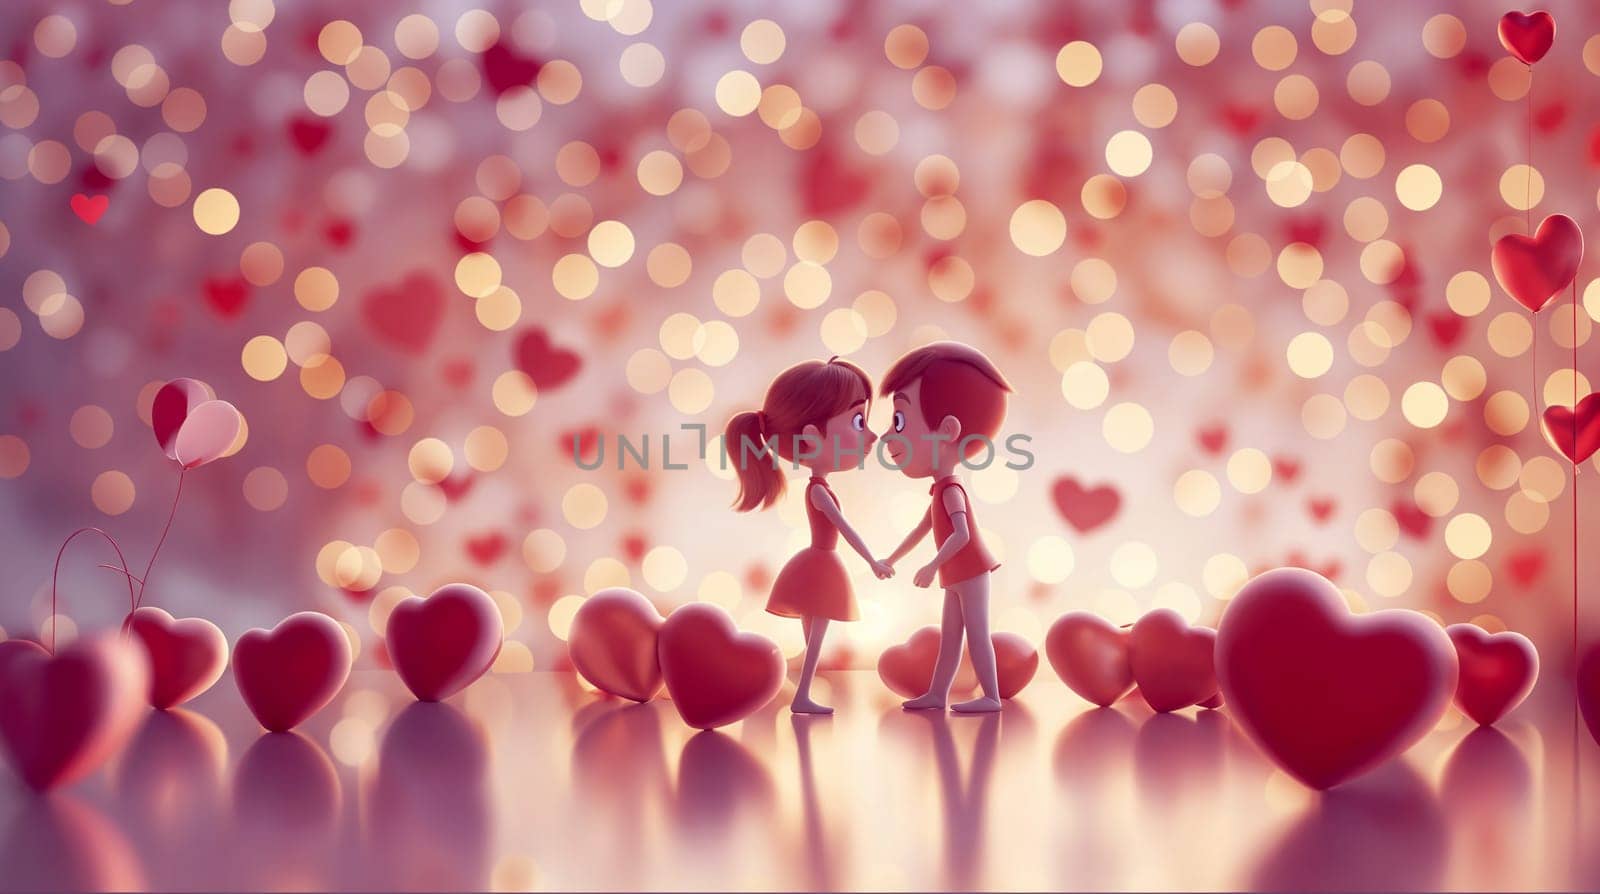 Animated couple surrounded by hearts and bokeh lights, symbolizing a whimsical Valentine's celebration by chrisroll